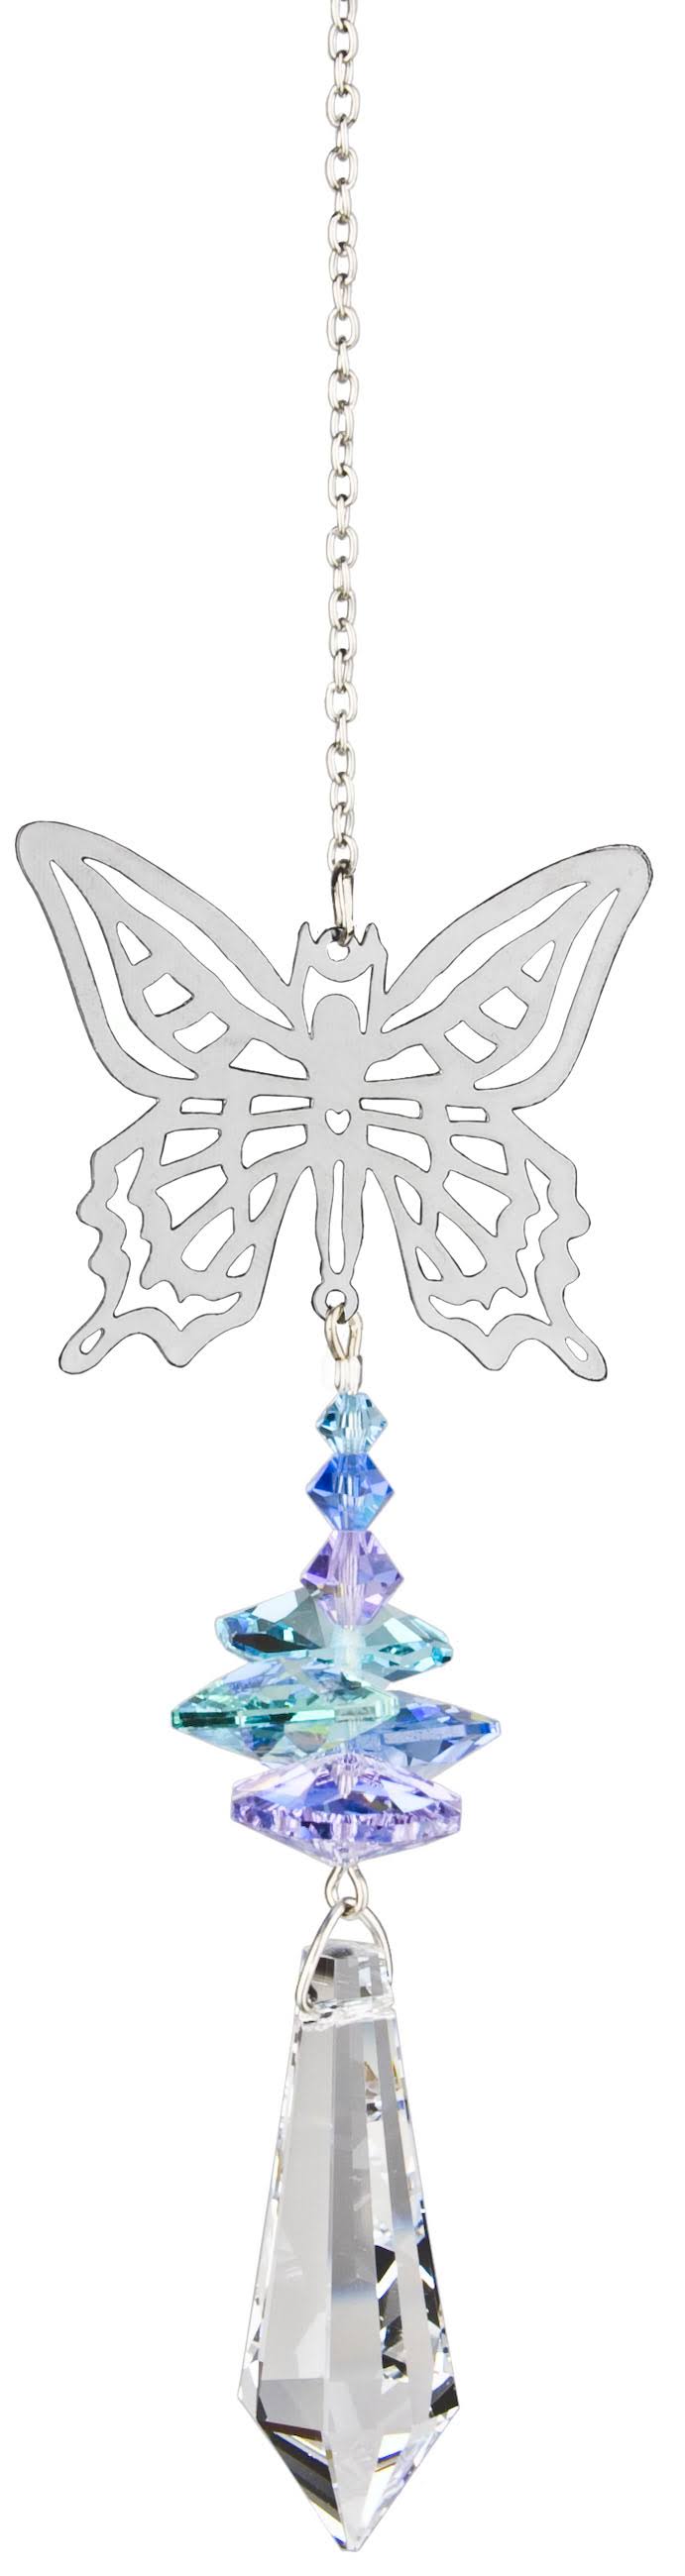 Woodstock Rainbow Makers Crystal Fantasy Butterfly Wind Chimes - 10"